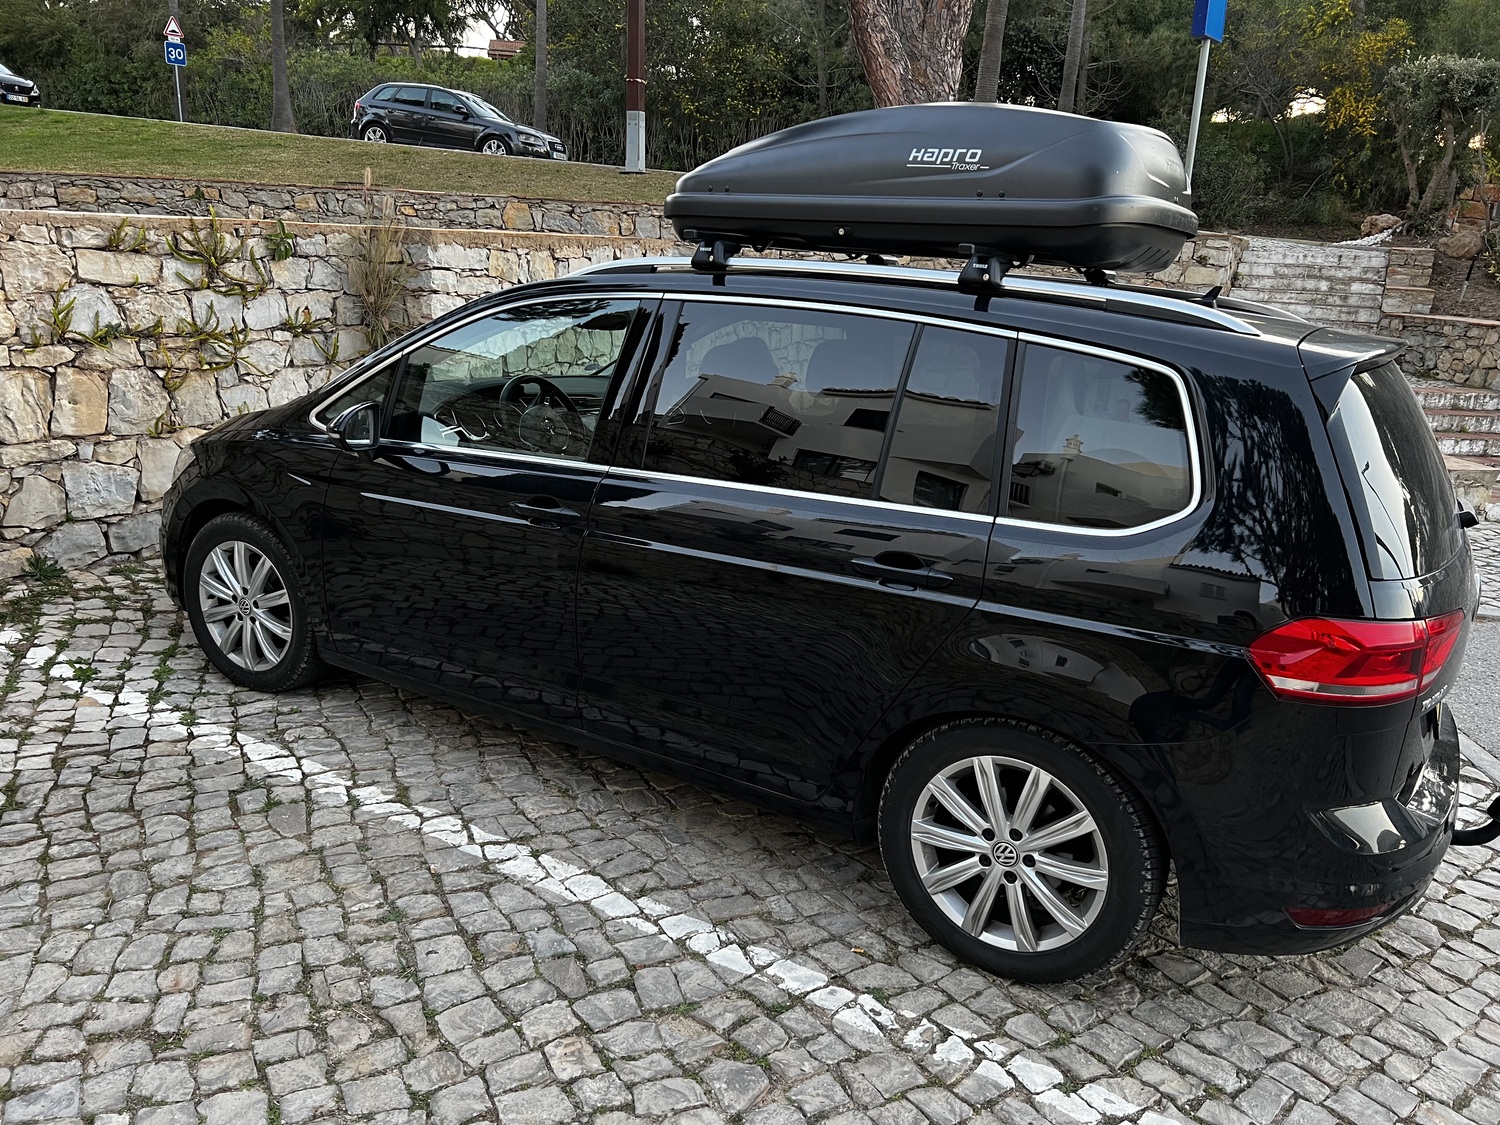 Our car with mounted roofbox.